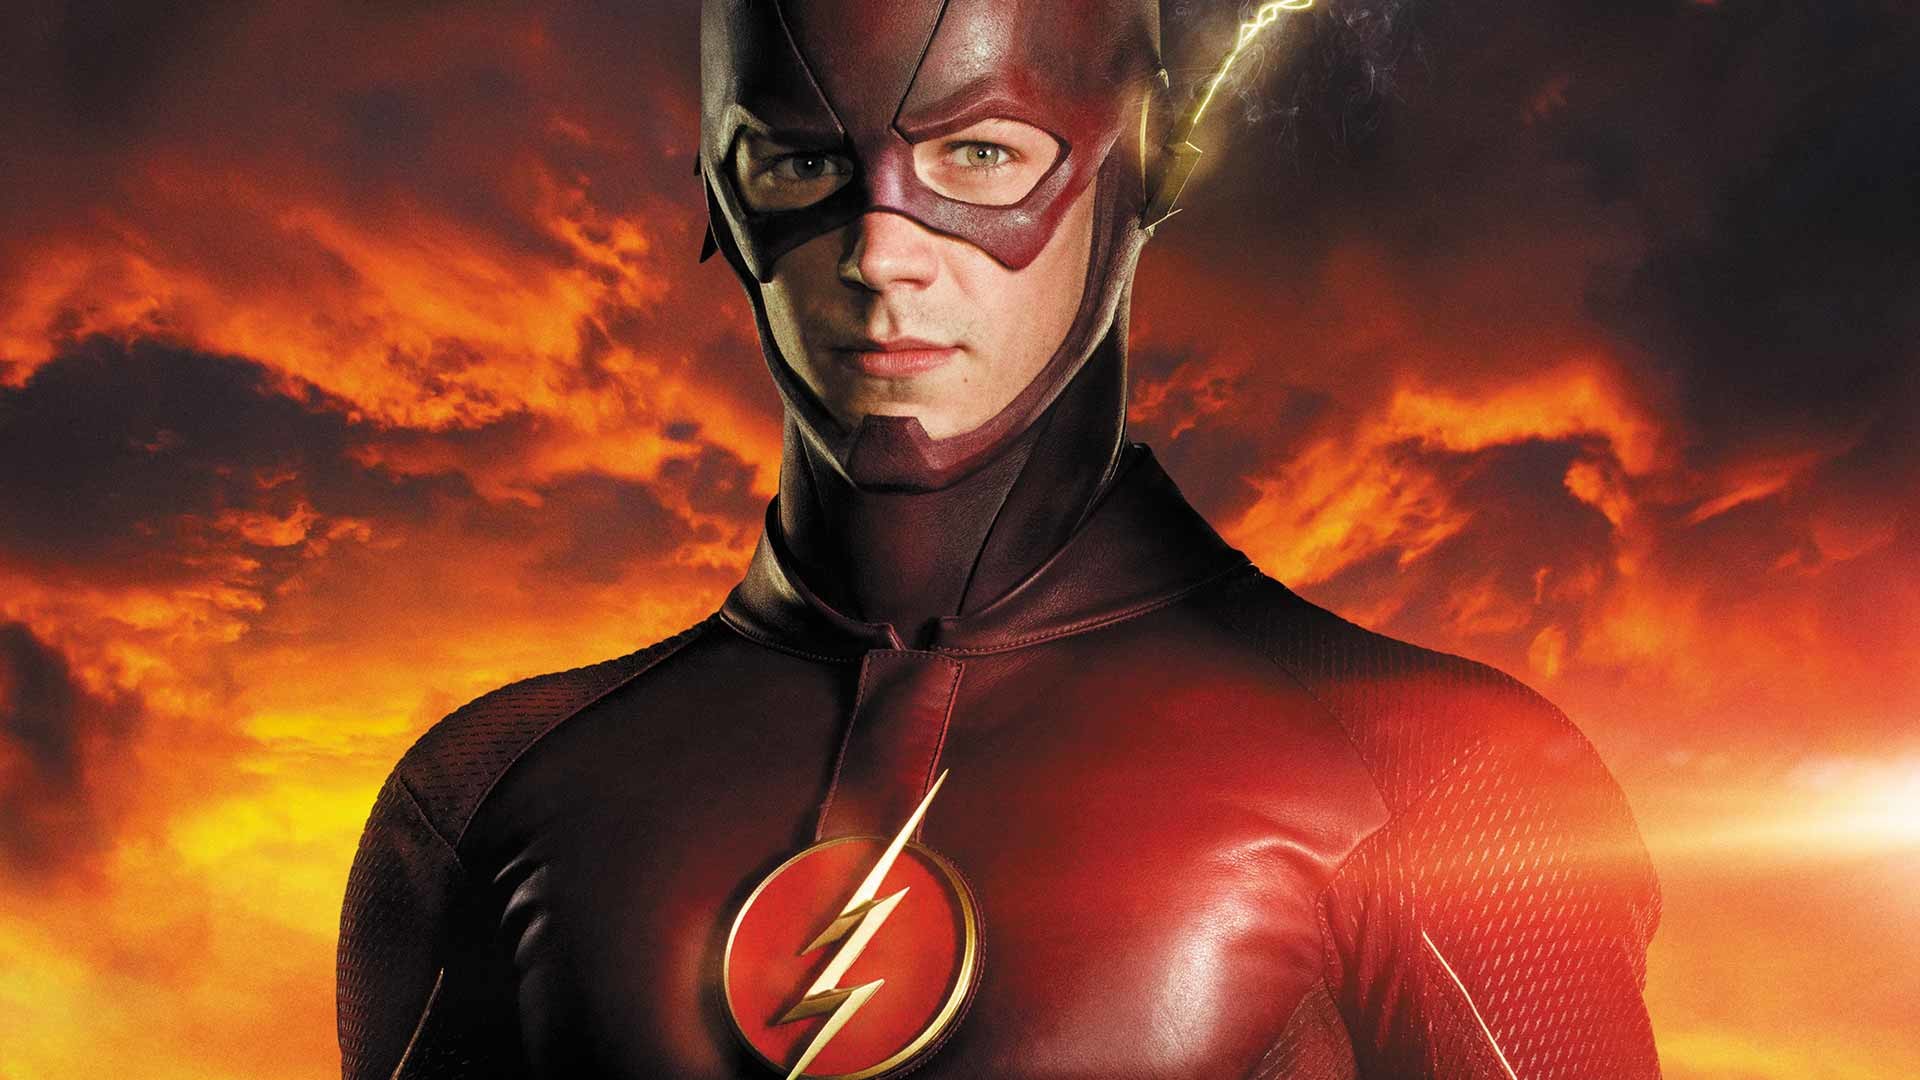 1920x1080 The Flash Season 4 premiere title may hint at comic-influenced story